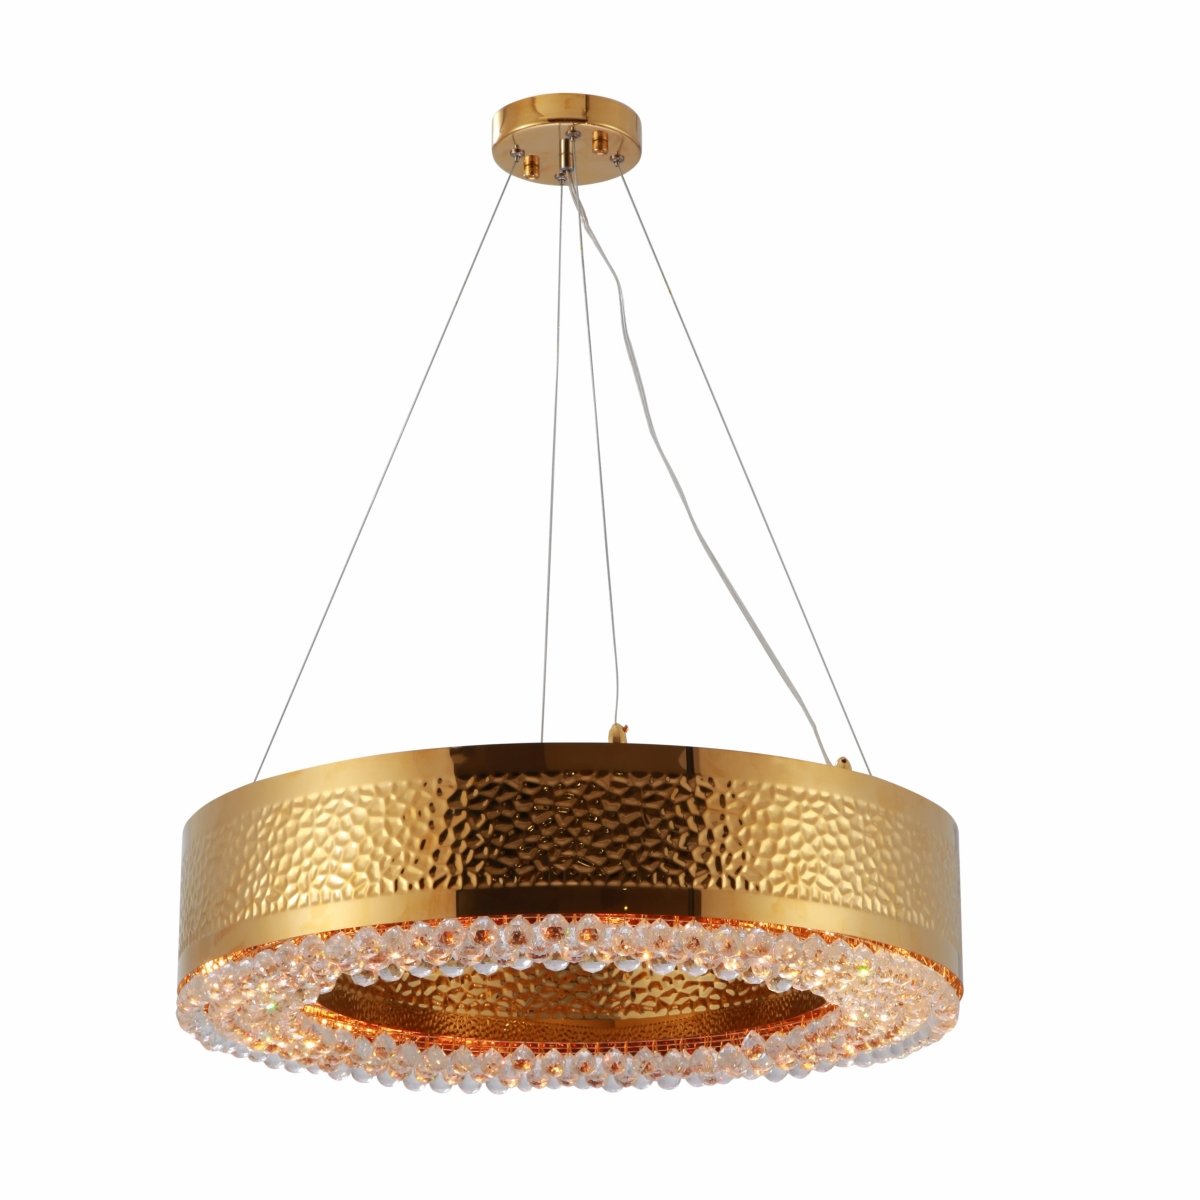 Main image of Ball Crystal Gold Metal Chandelier D600 with 8XE14 Fitting | TEKLED 156-19564